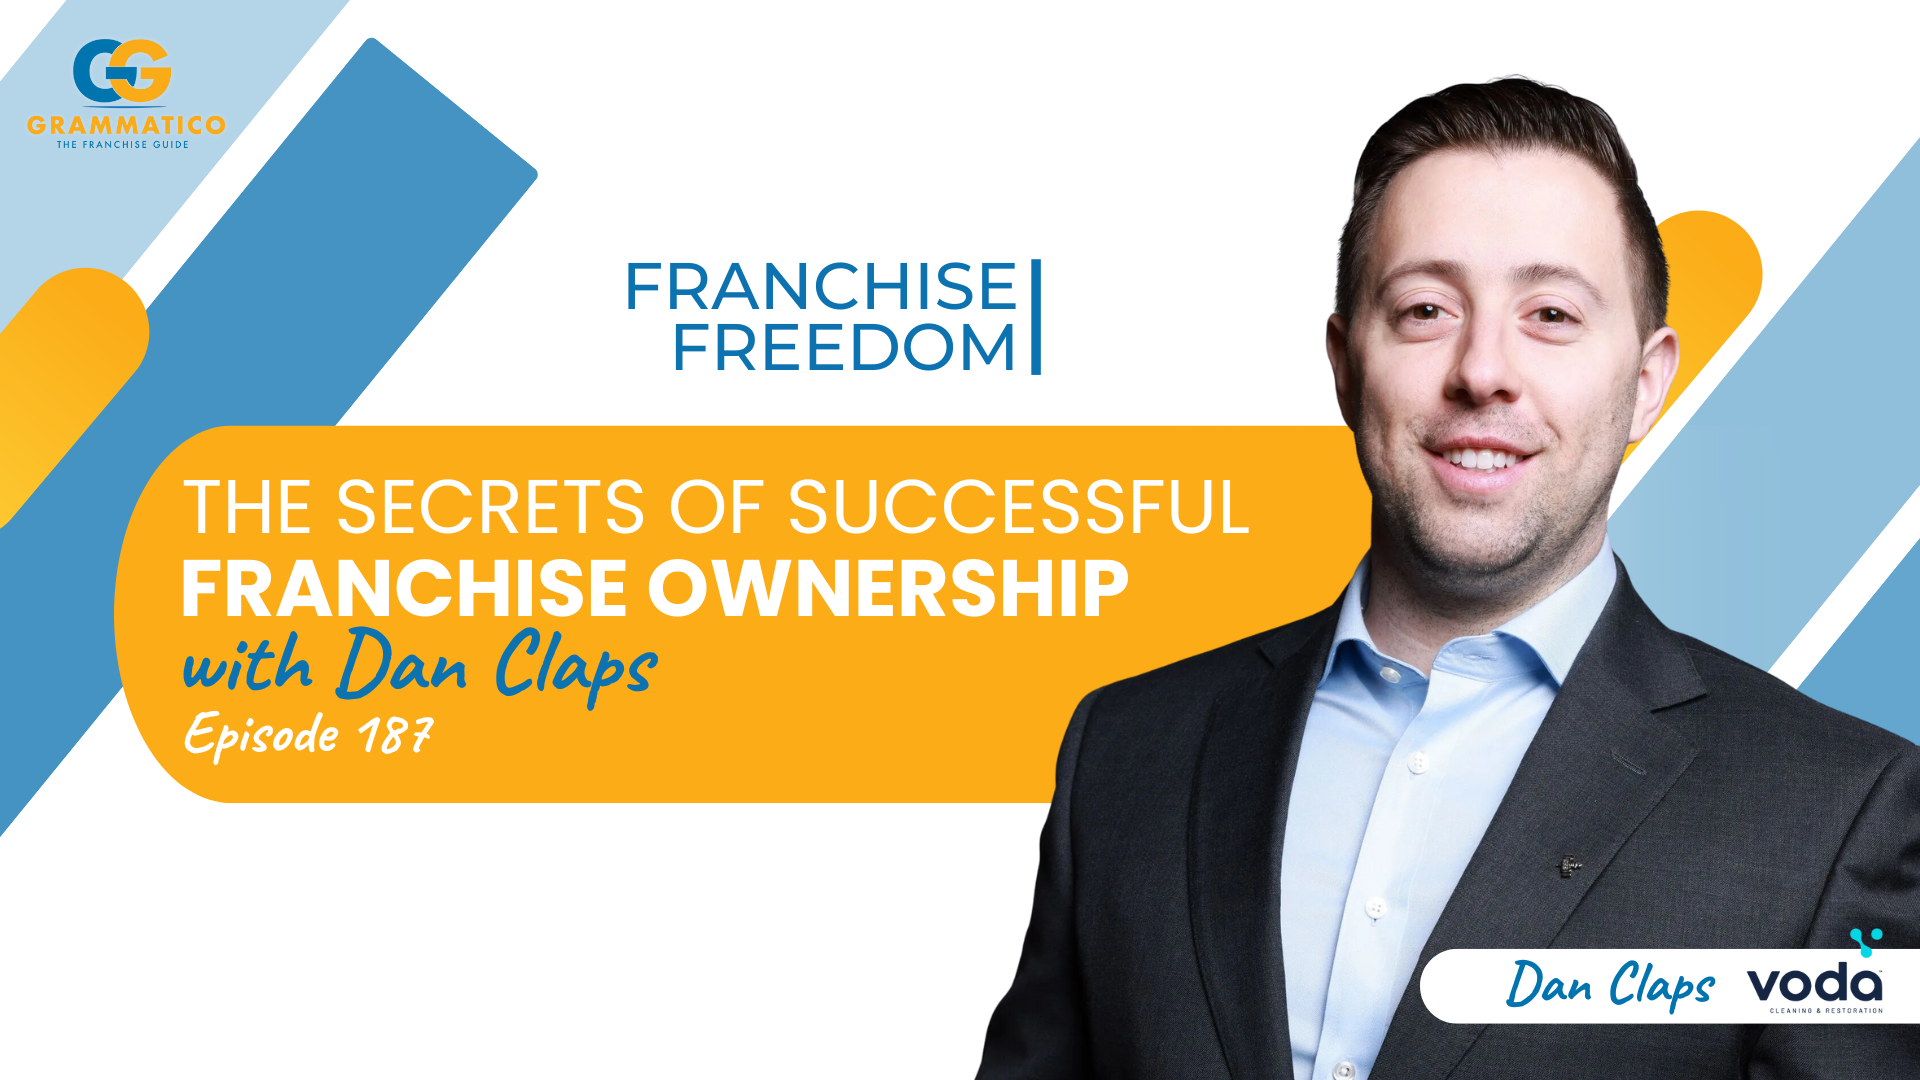 The Secrets of Successful Franchise Ownership with Dan Claps